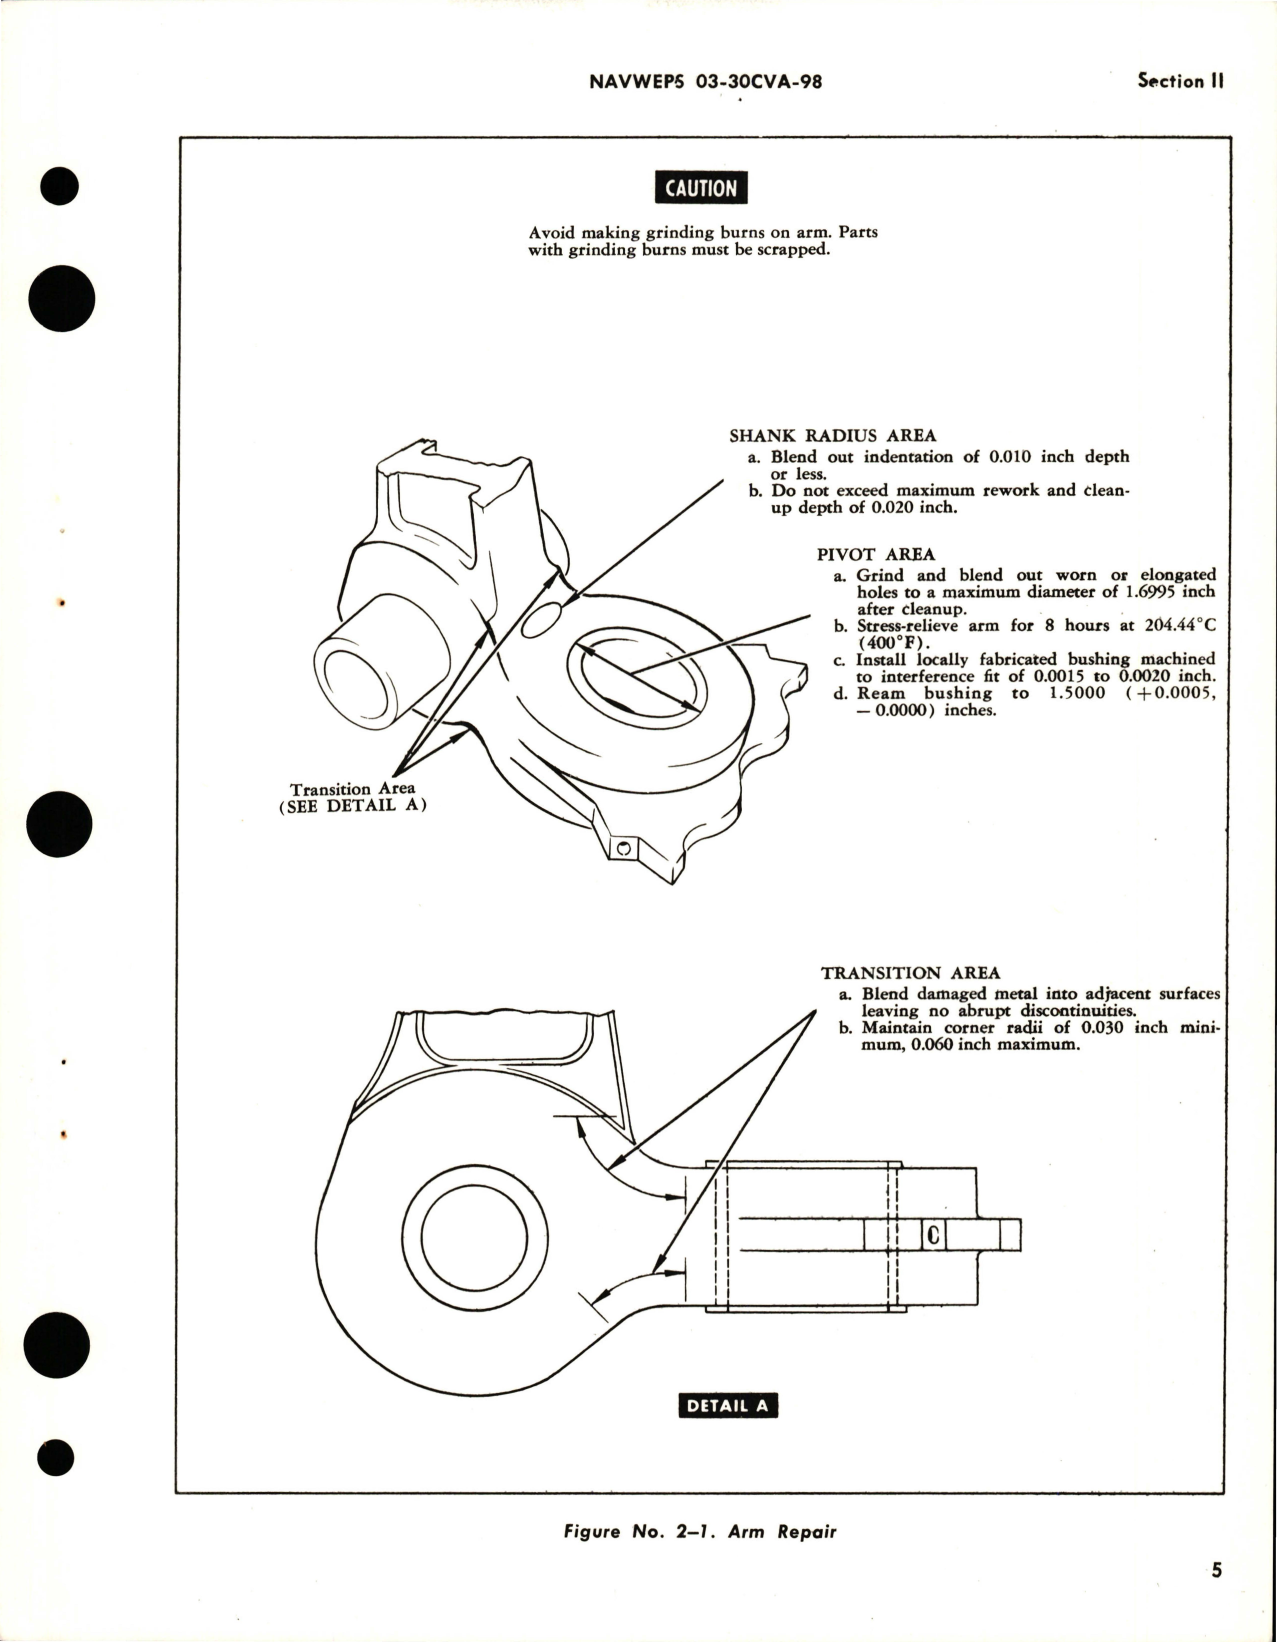 Sample page 7 from AirCorps Library document: Overhaul Instructions for Arresting Gear Assembly - Part CV15-664002-12